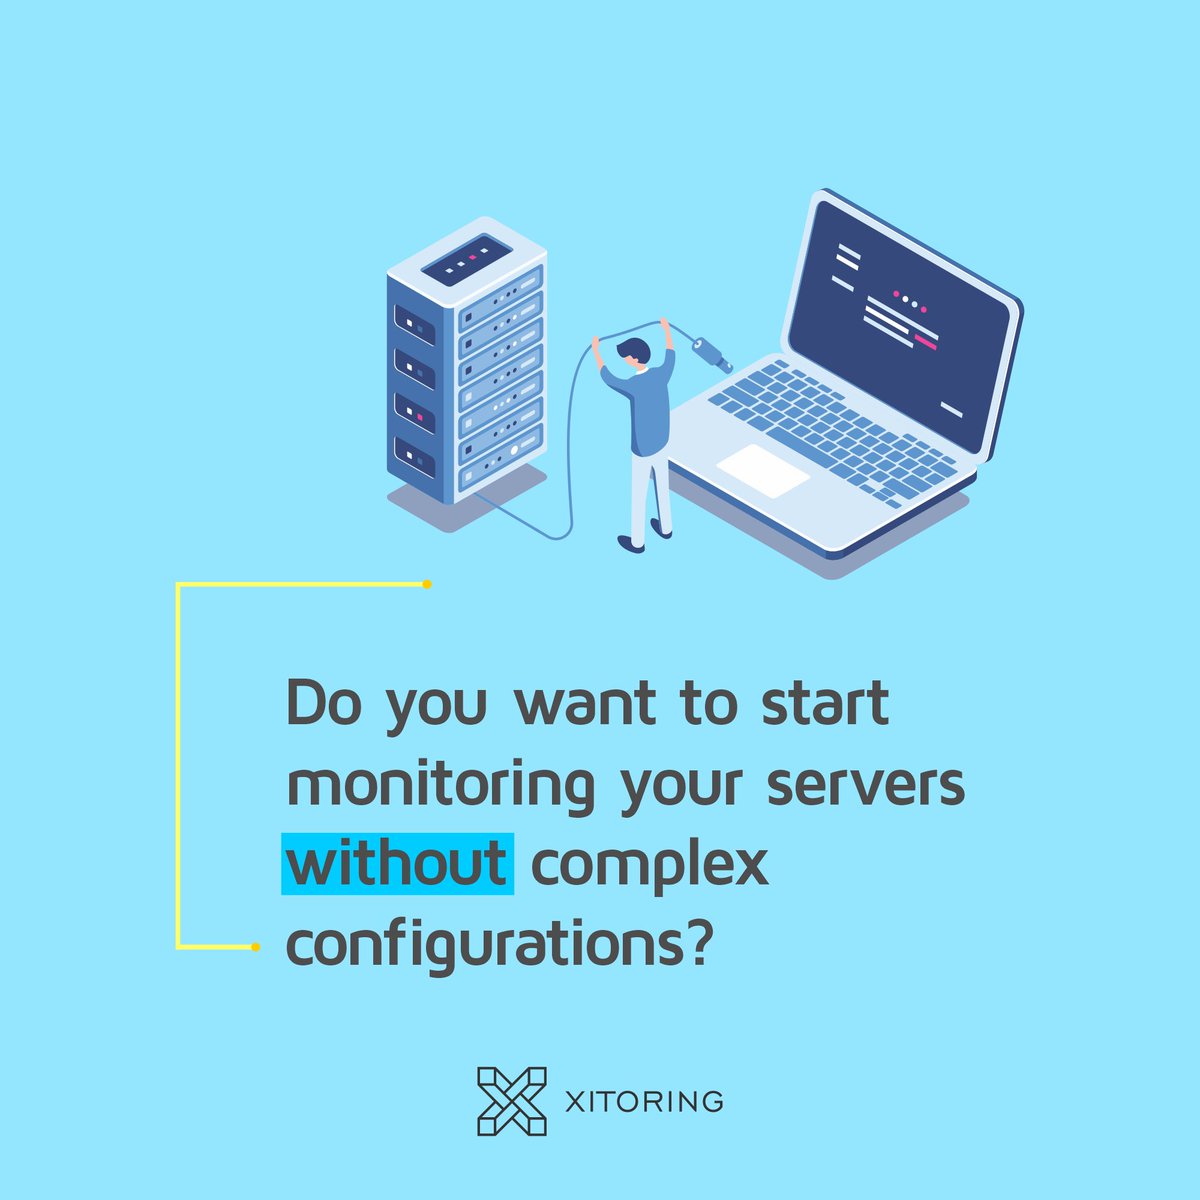 Do you want to start monitoring your servers without complex configurations?

#serverproblems #serverlifeproblems #servermonitoring #linux #servermonitor #serverconfiguration #sysadmin